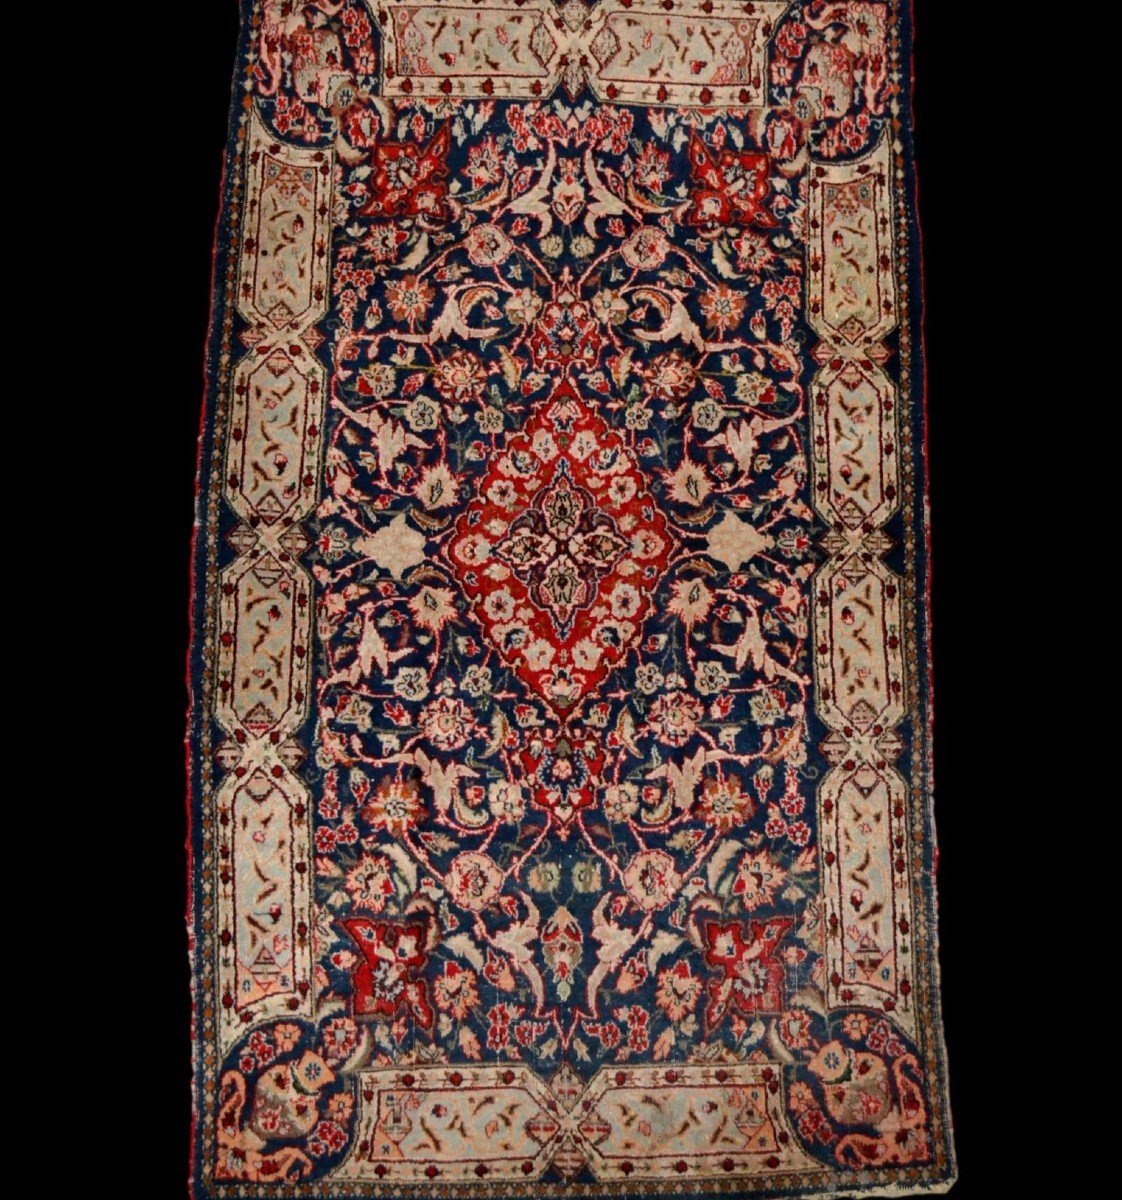 Old Persian Kashan Rug, 90 Cm X 163 Cm, Wool And Silk, Iran, Late 19th To Early 20th Century